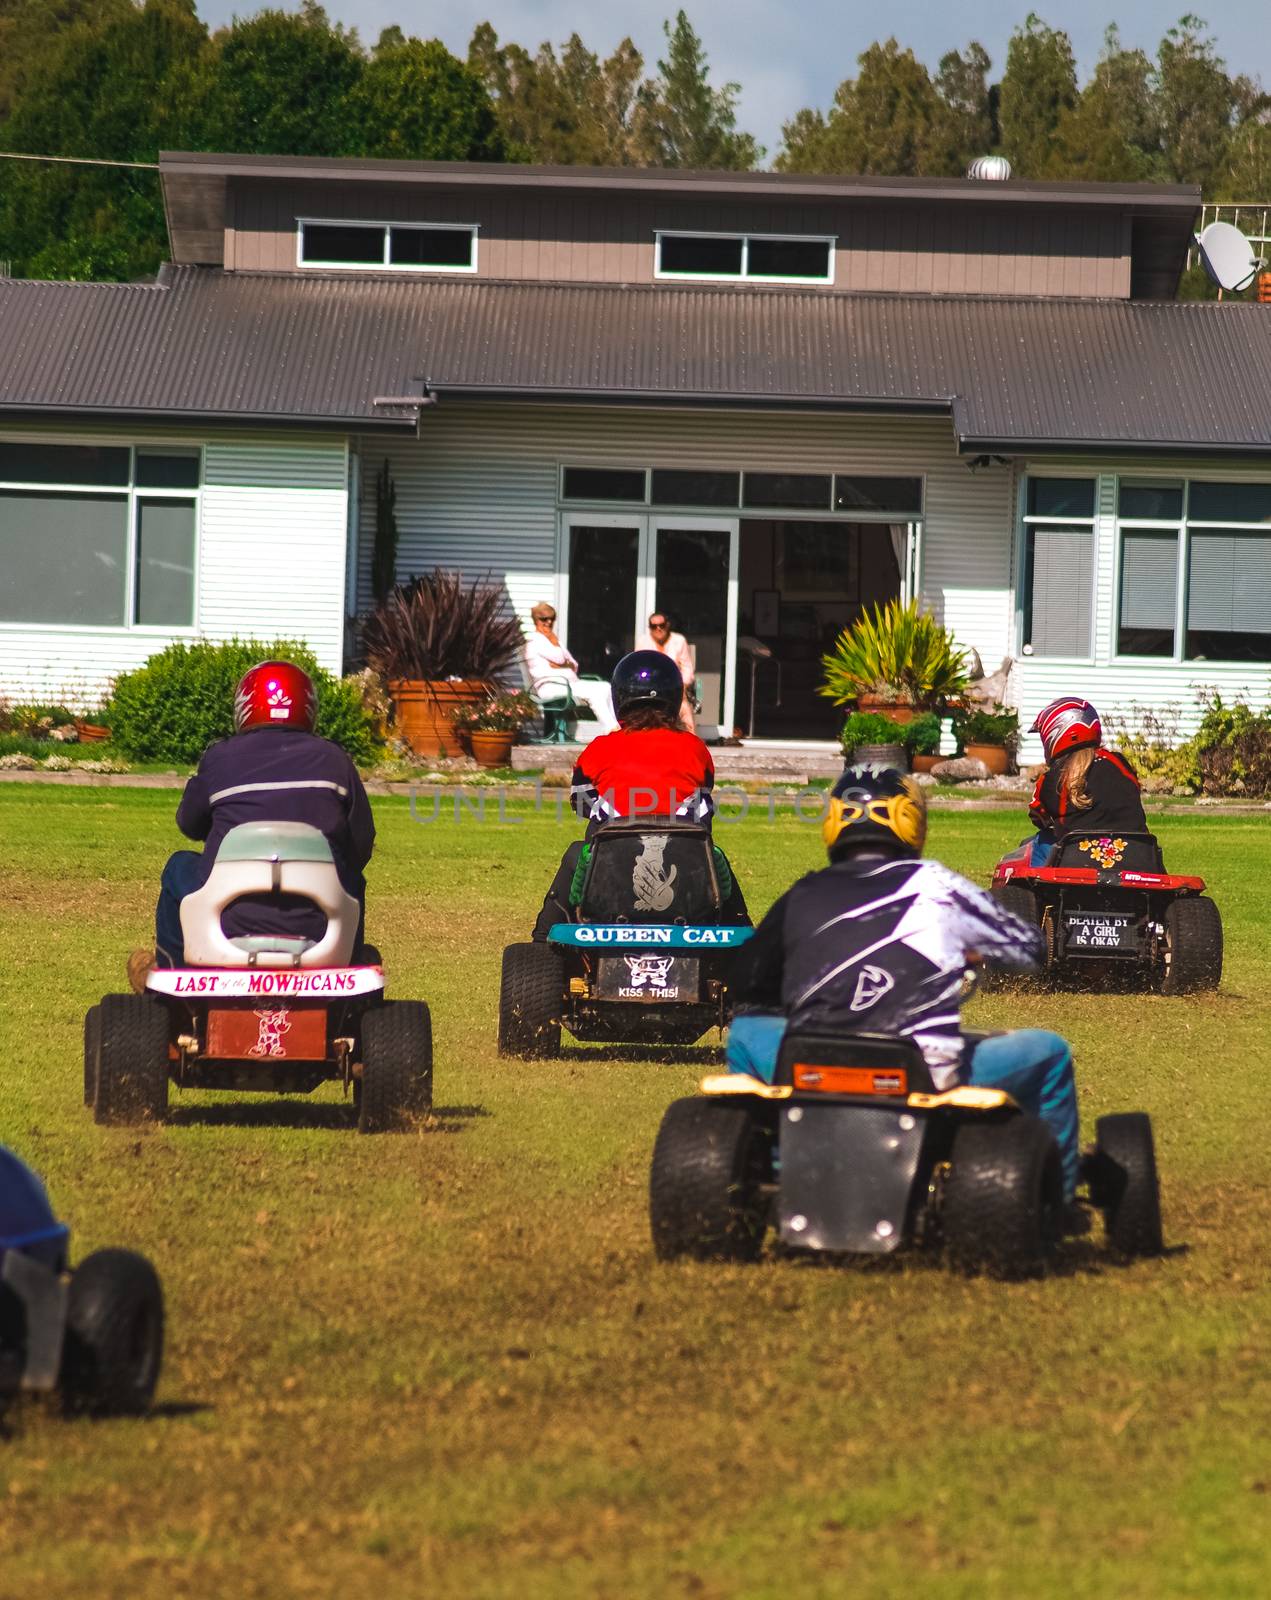 Drivers on trimmed lawnmowers by arvidnorberg